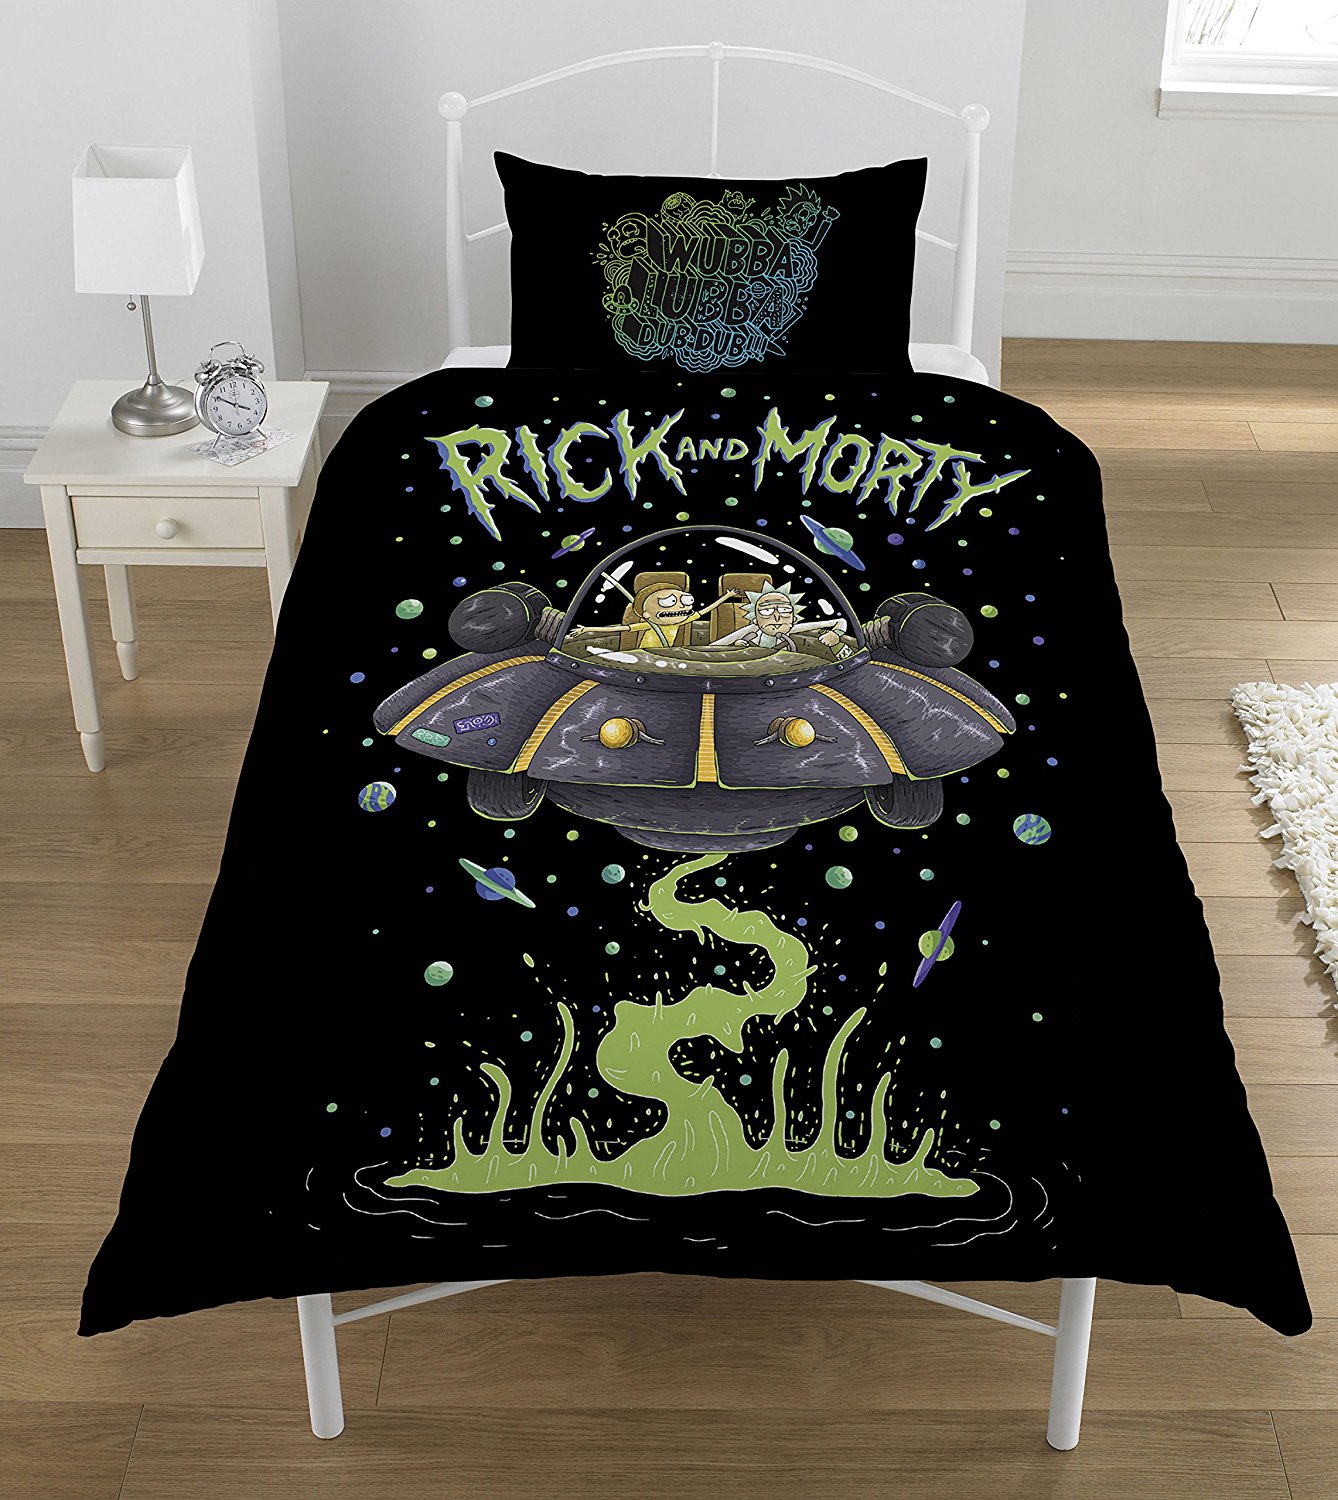 Single Duvet and Pillow Set: Rick and Morty - UFO